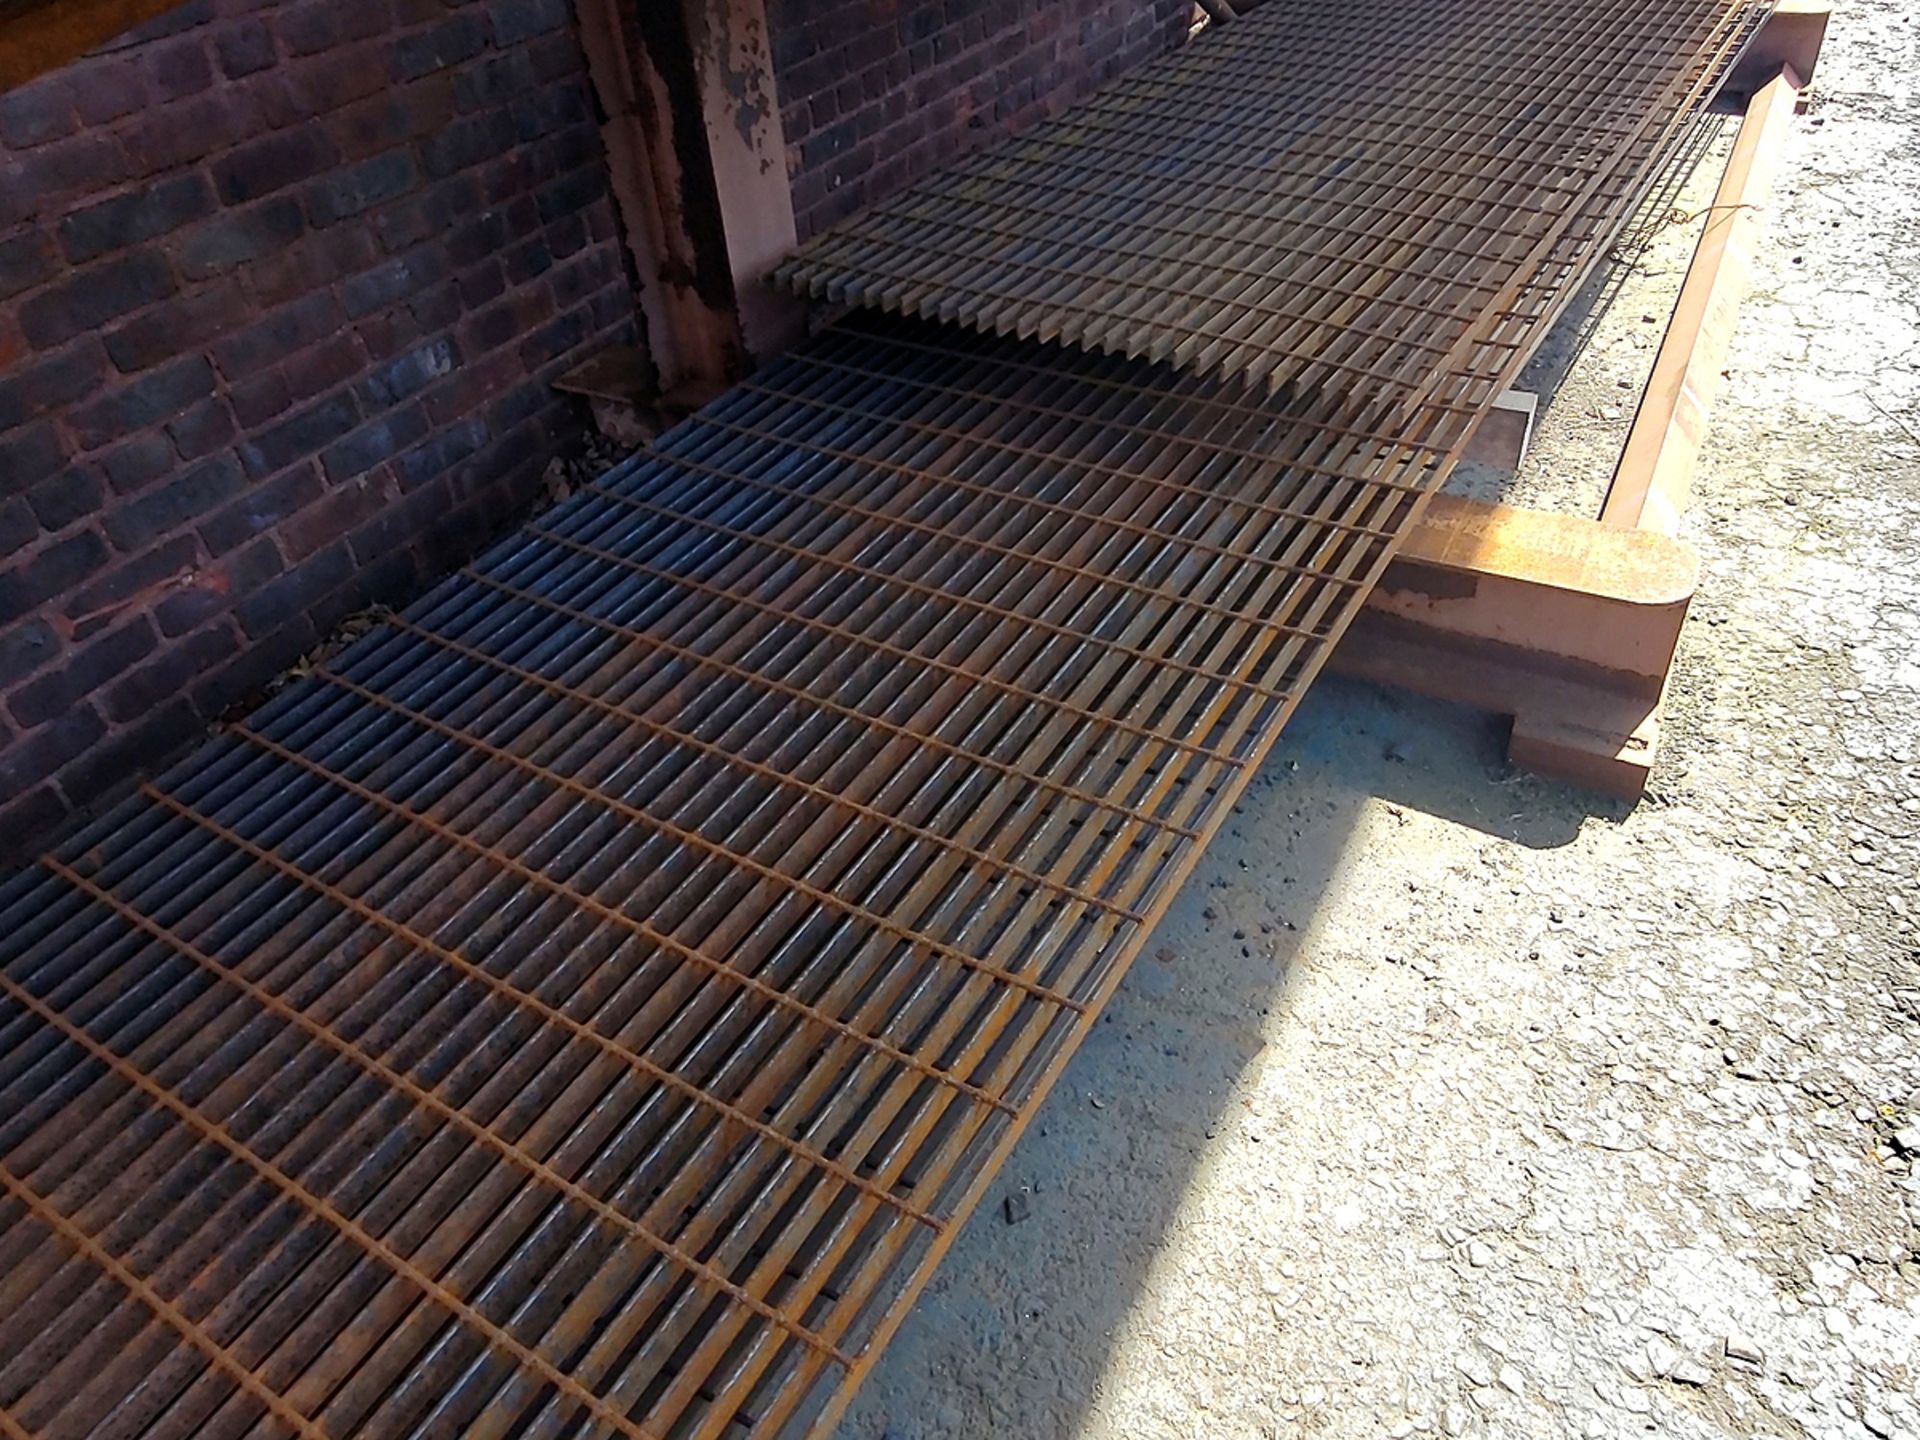 A Group of Ass't Size Steel Grates, Angle Iron, and Rods on Rack - Image 2 of 4